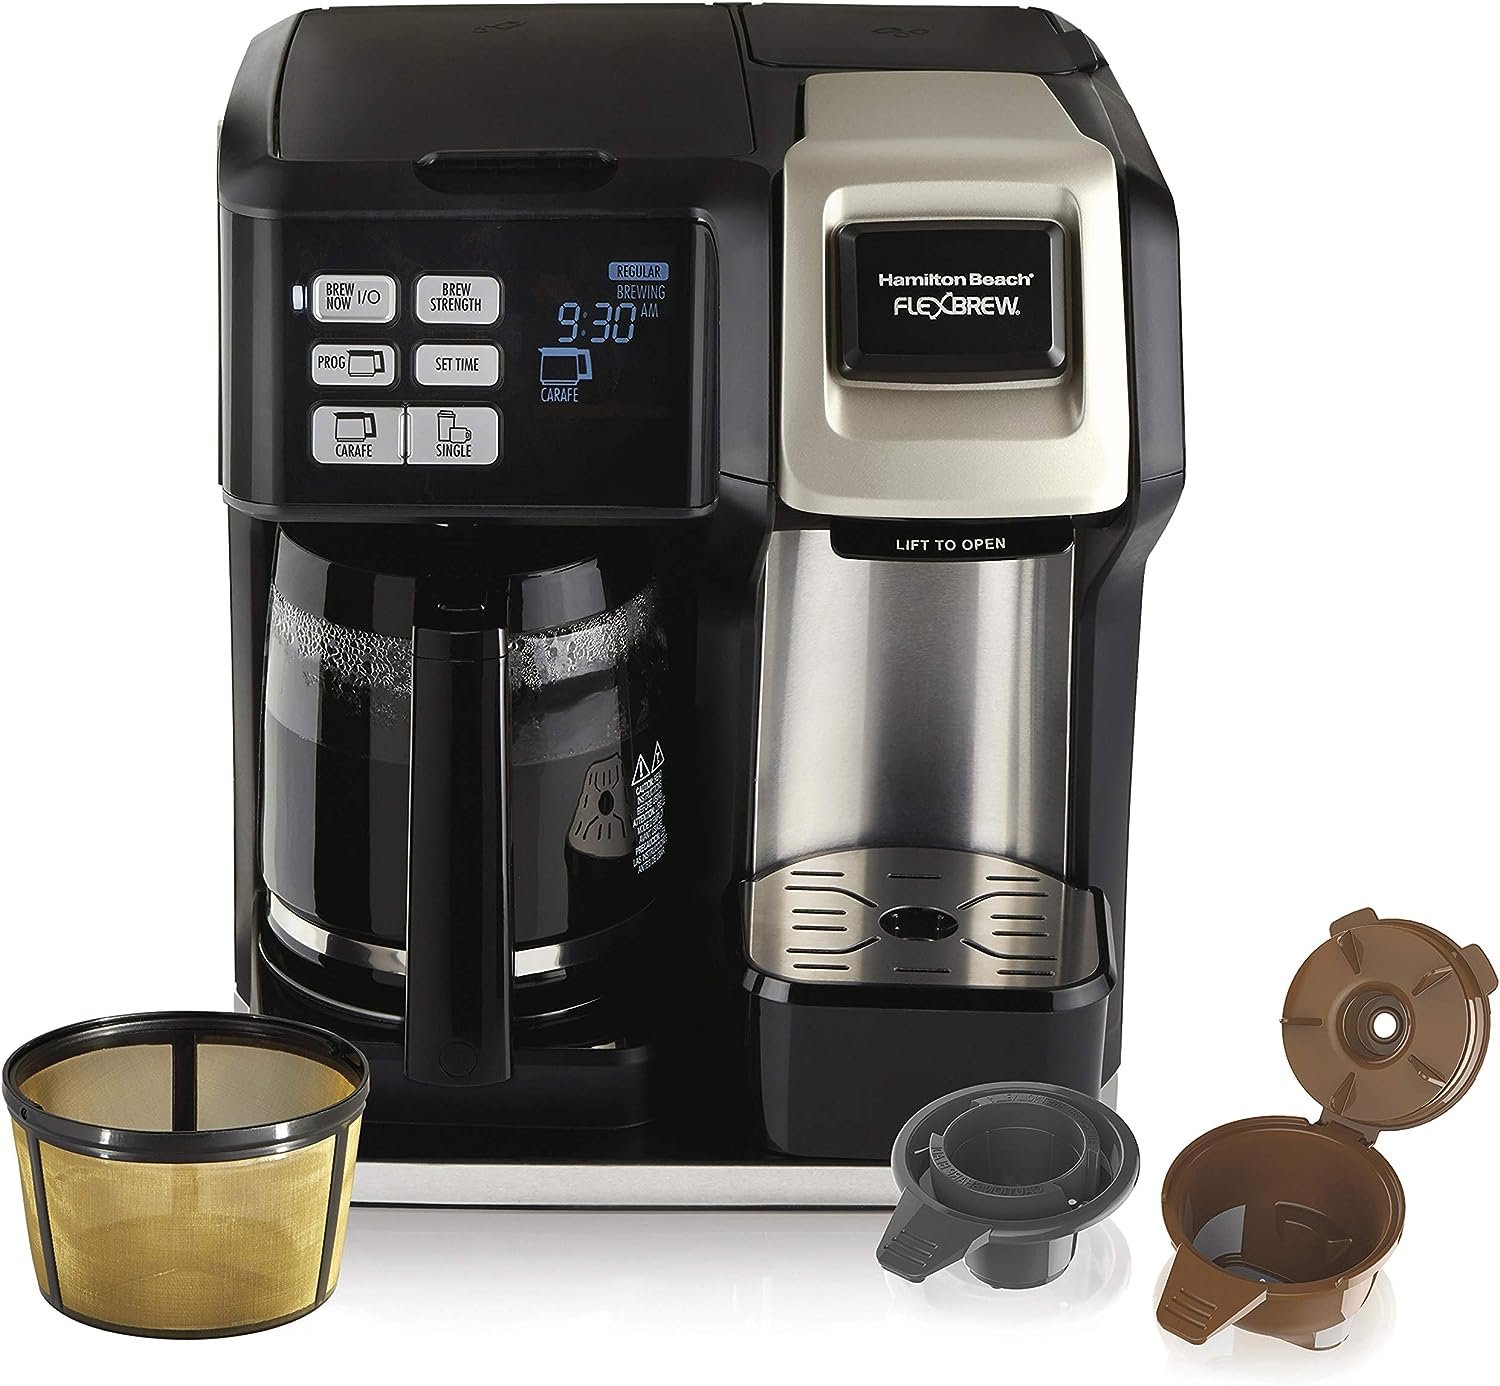 Hamilton Beach FlexBrew Trio 2-Way Coffee Maker, Compatible with K-Cup Pods or Grounds, Single Serve  Full 12c Pot, Permanent Gold-Tone Filter, Black  Silver